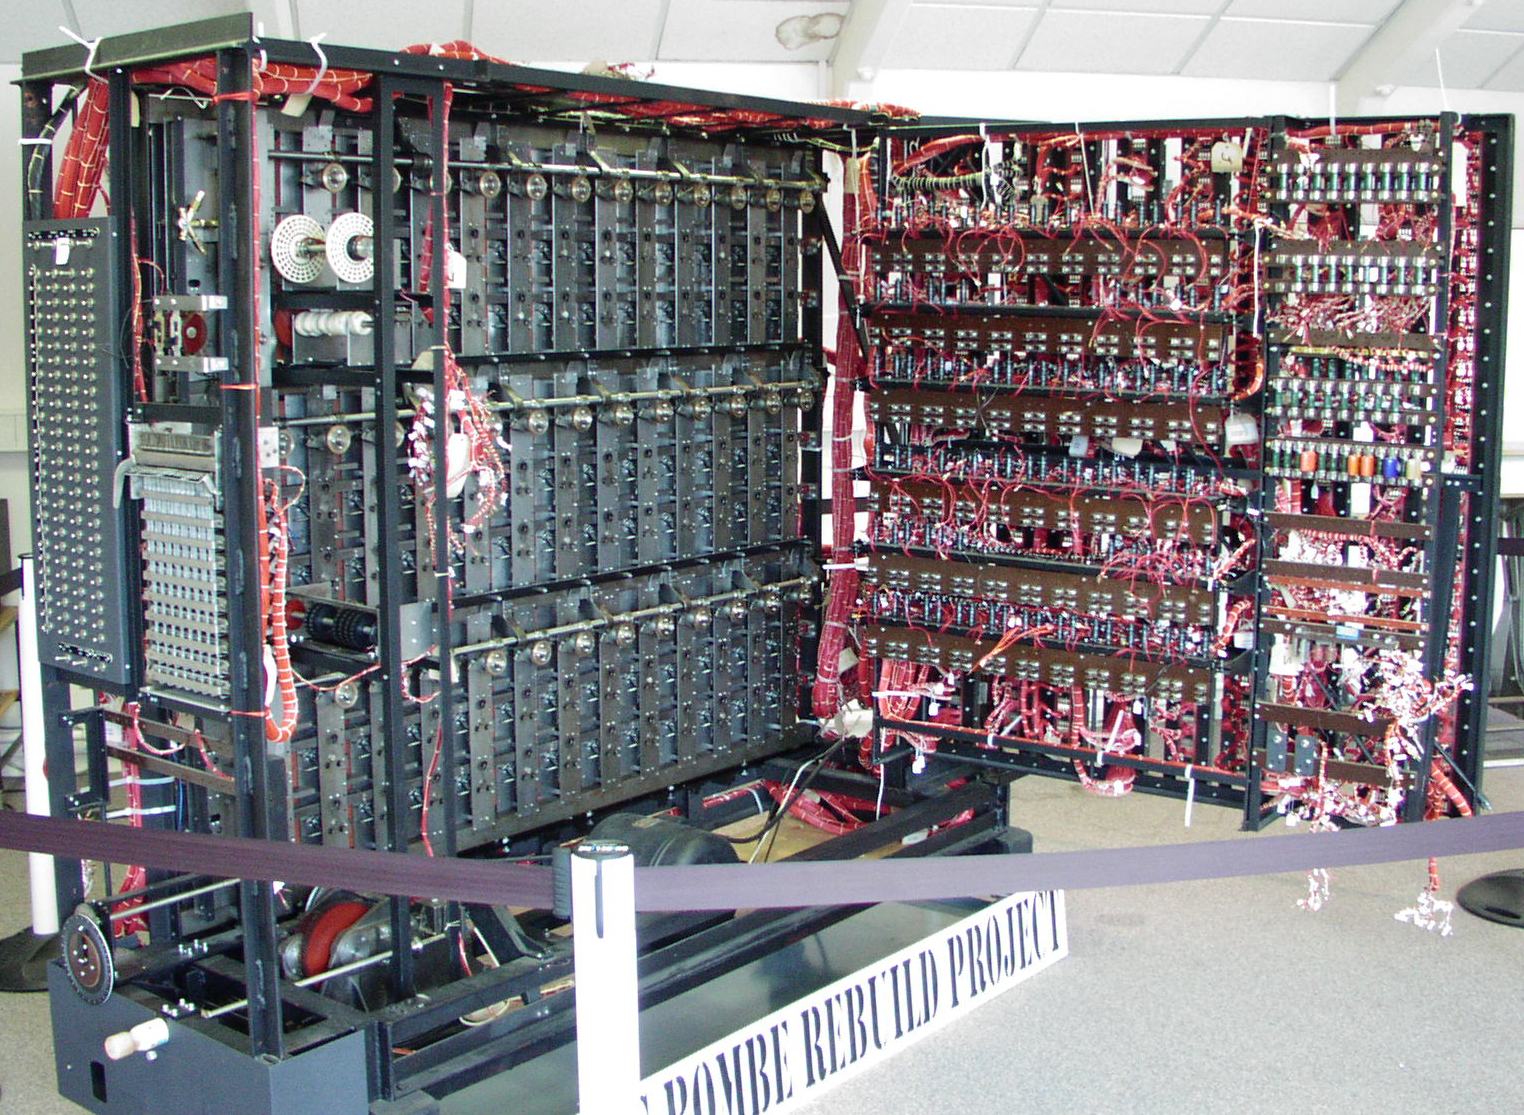 A working replica of a bombe machine, partially disassembled for display